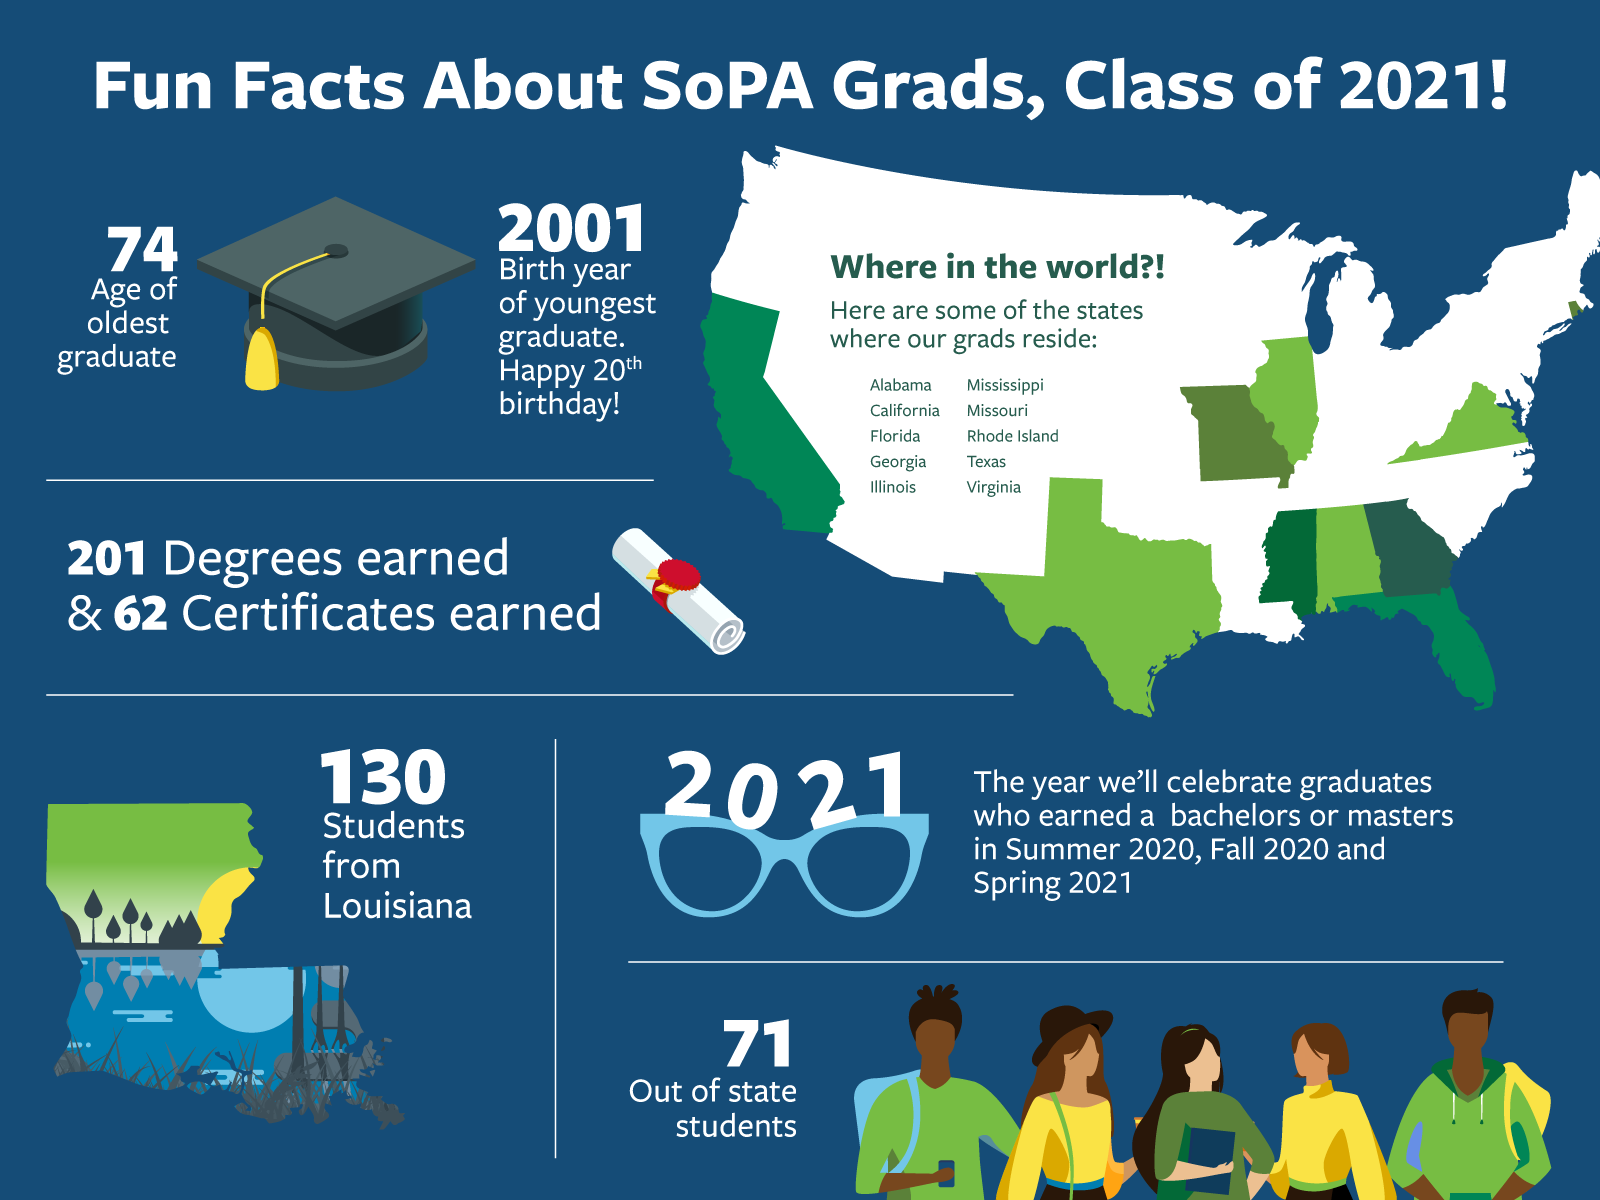 Fun Facts About SoPA Grads, Class of 2021